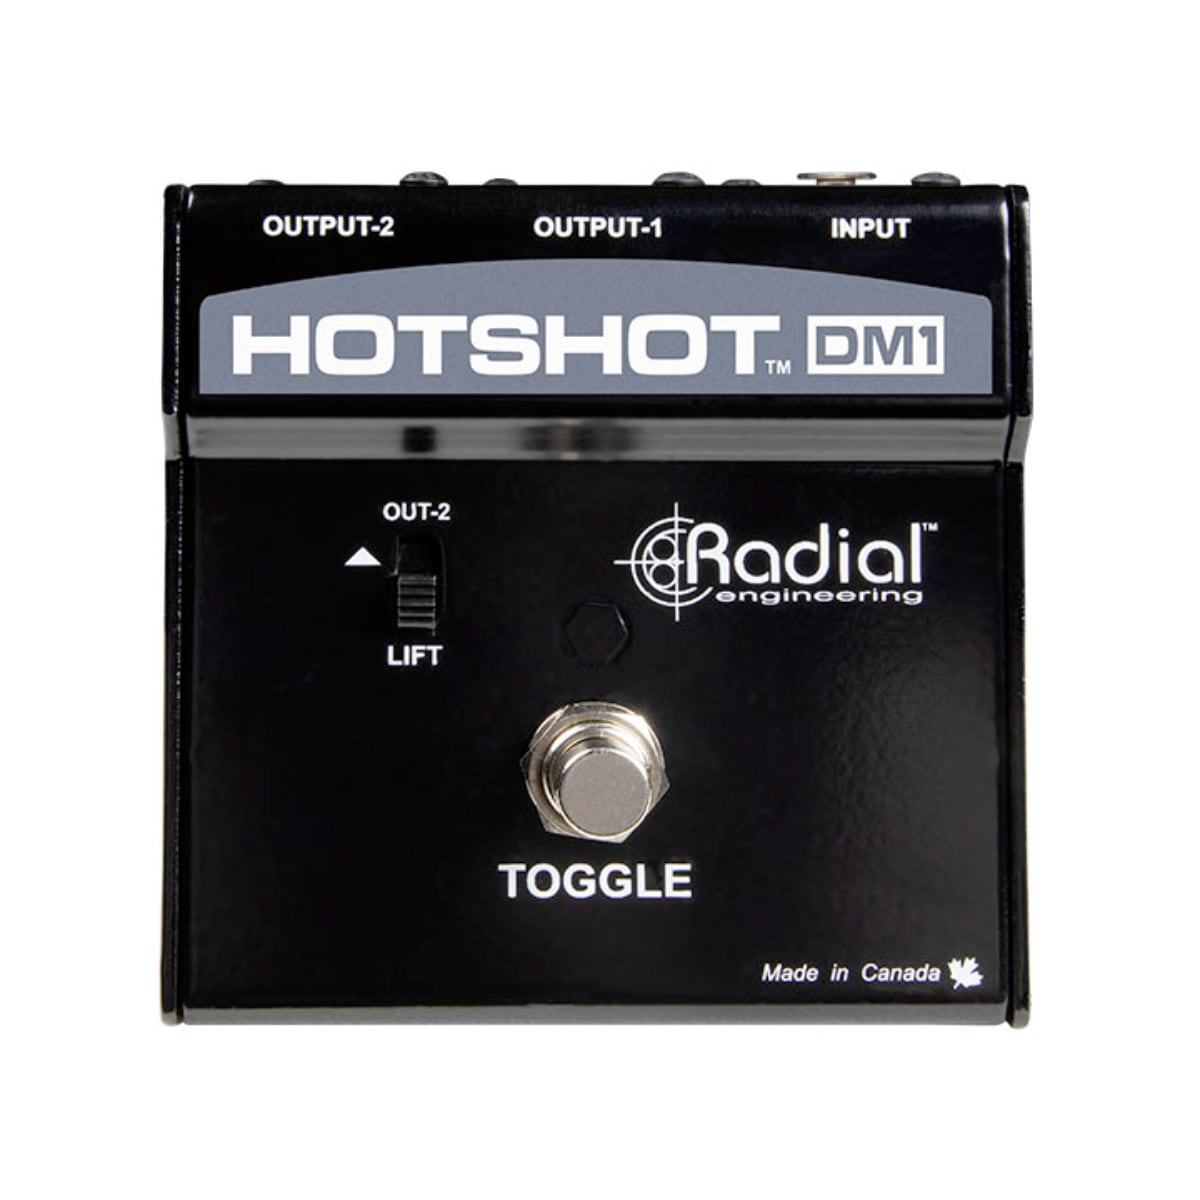 Radial Engineering HotShot DM1 Mic switcher toggles signal from PA to monitors. For dynamic mics